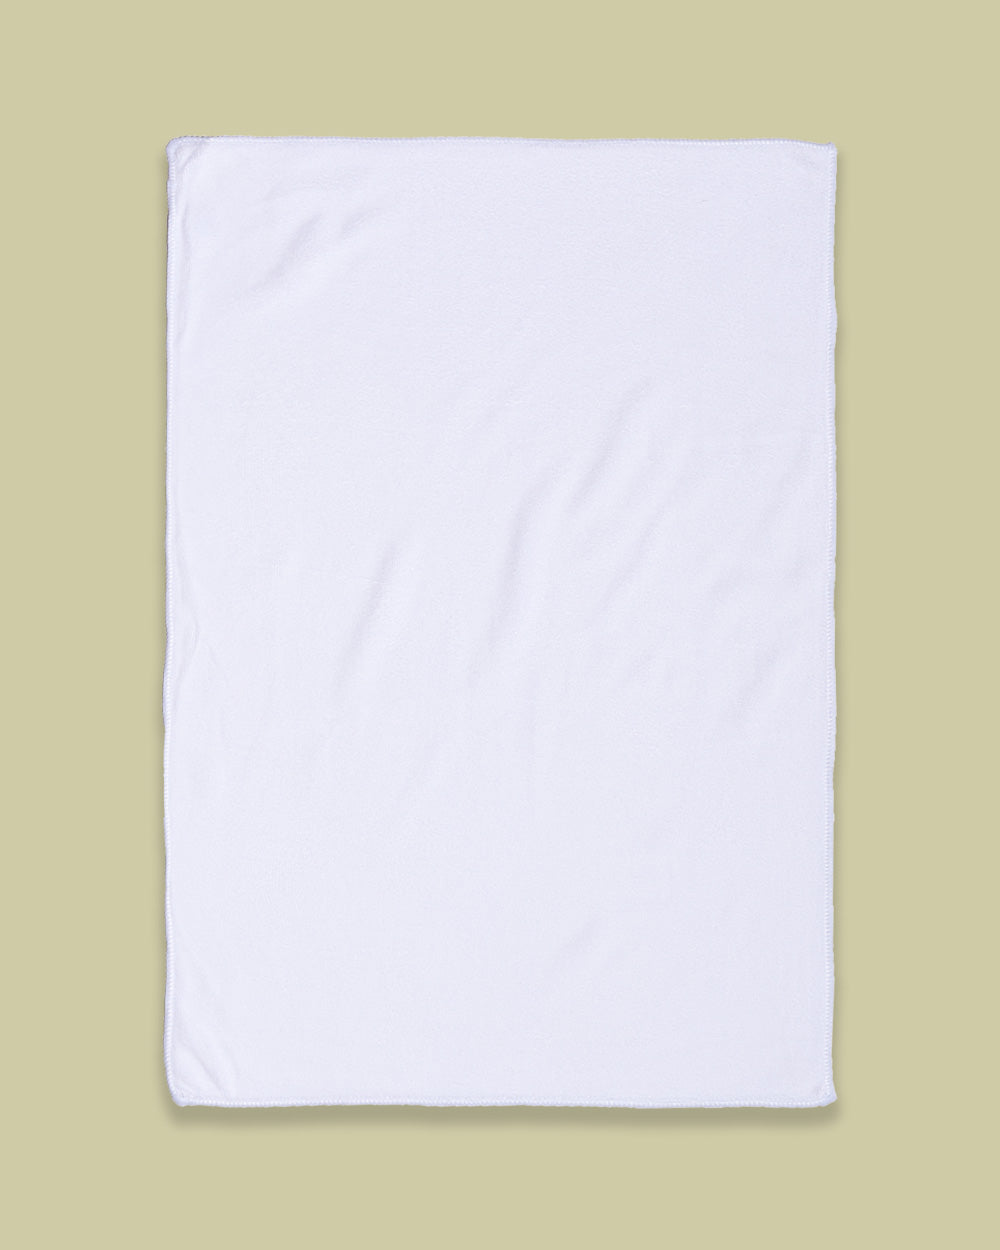 Square Flowers Rally Towel (SIZE 11"X17")